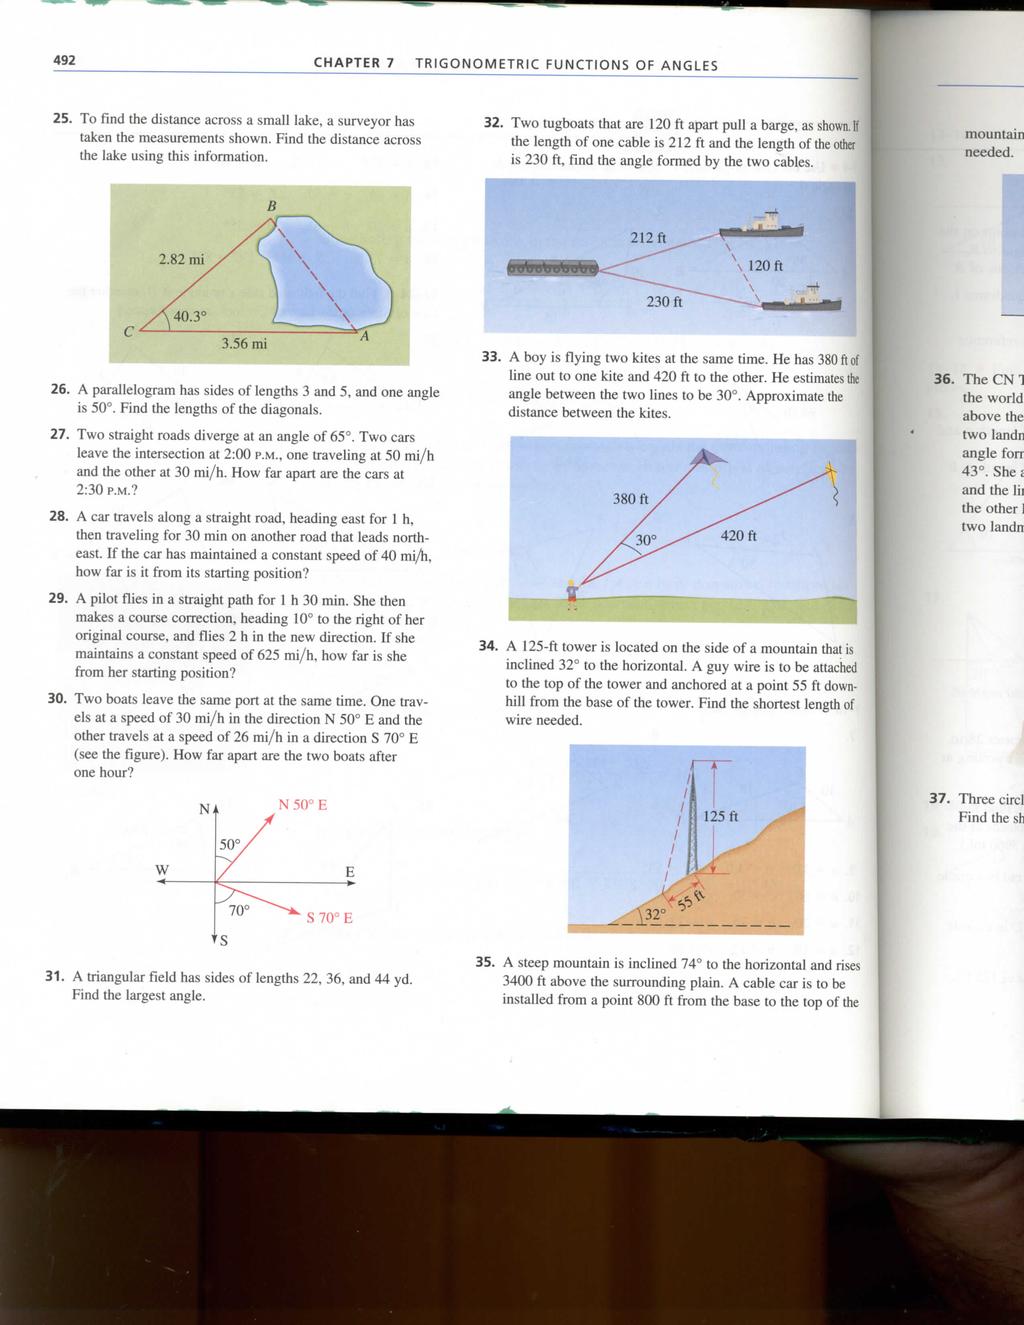 492 CHAPTER 7 TRIGONOMETRIC FUNCTIONS OF ANGLES 25. To find the distance across a small lake, a surveyor has taken the measurements shown. Find the distance across the lake using this information. 32.